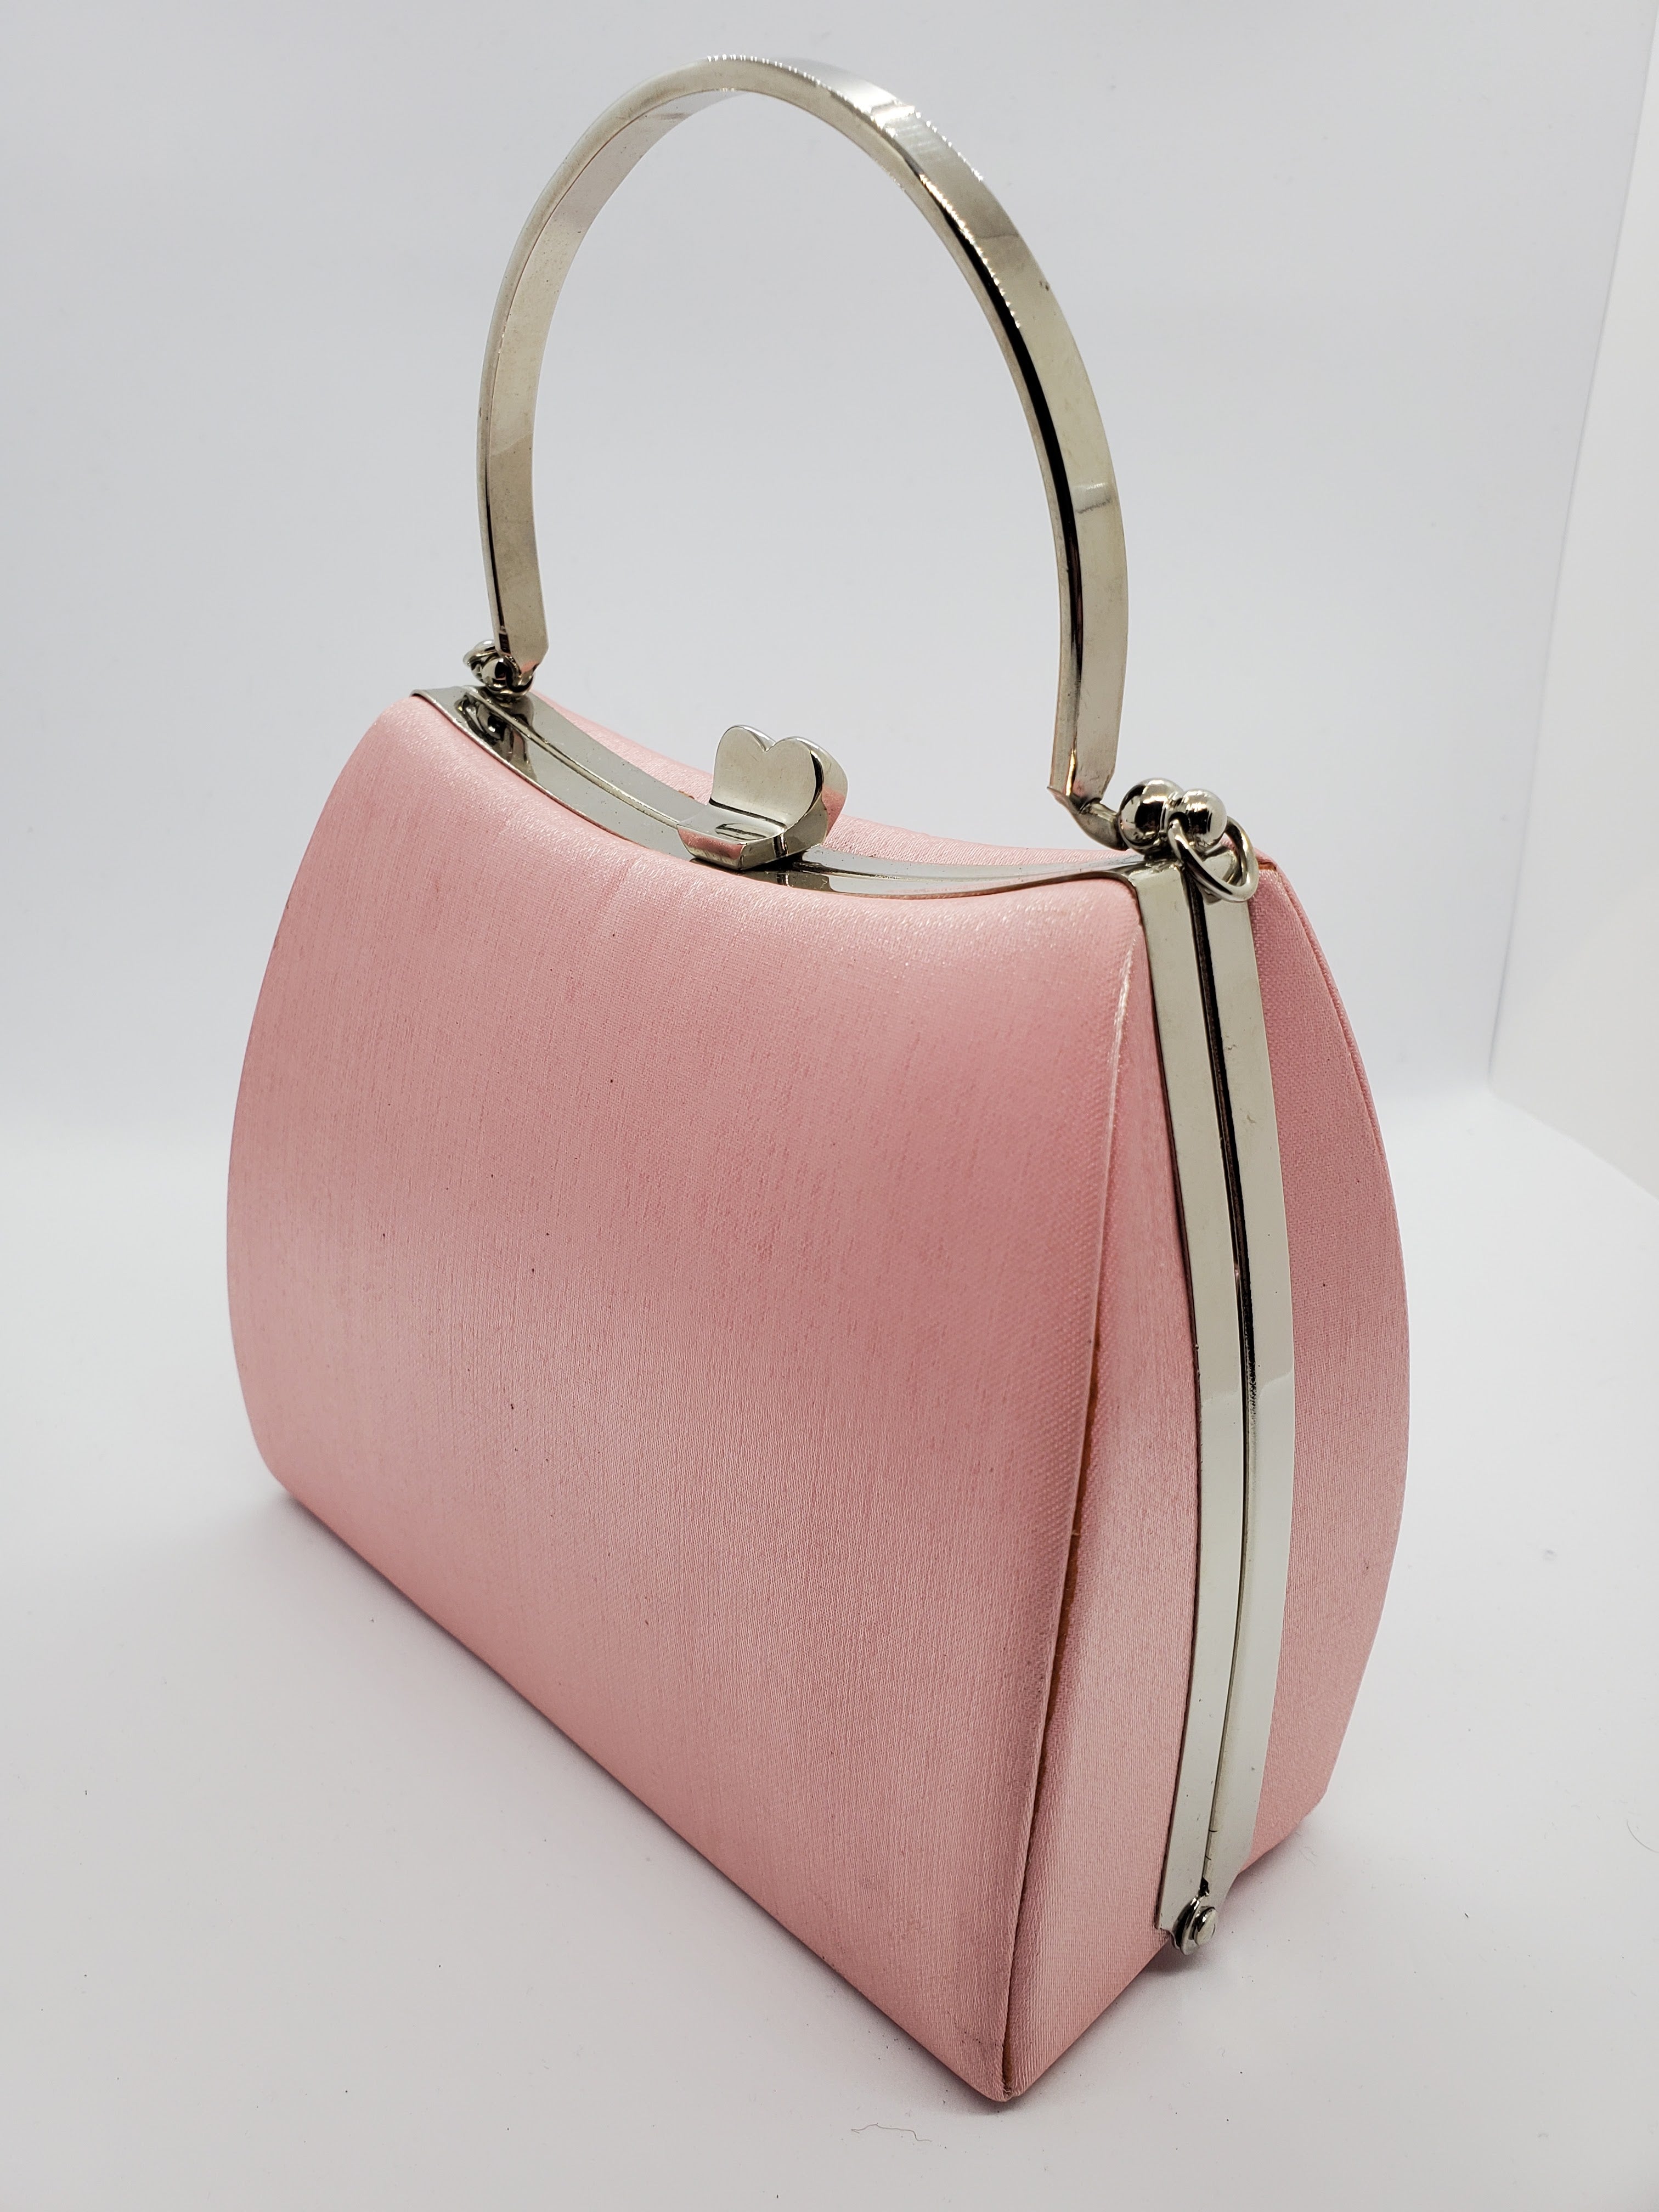 Side View of Light pink satin hard shell purse